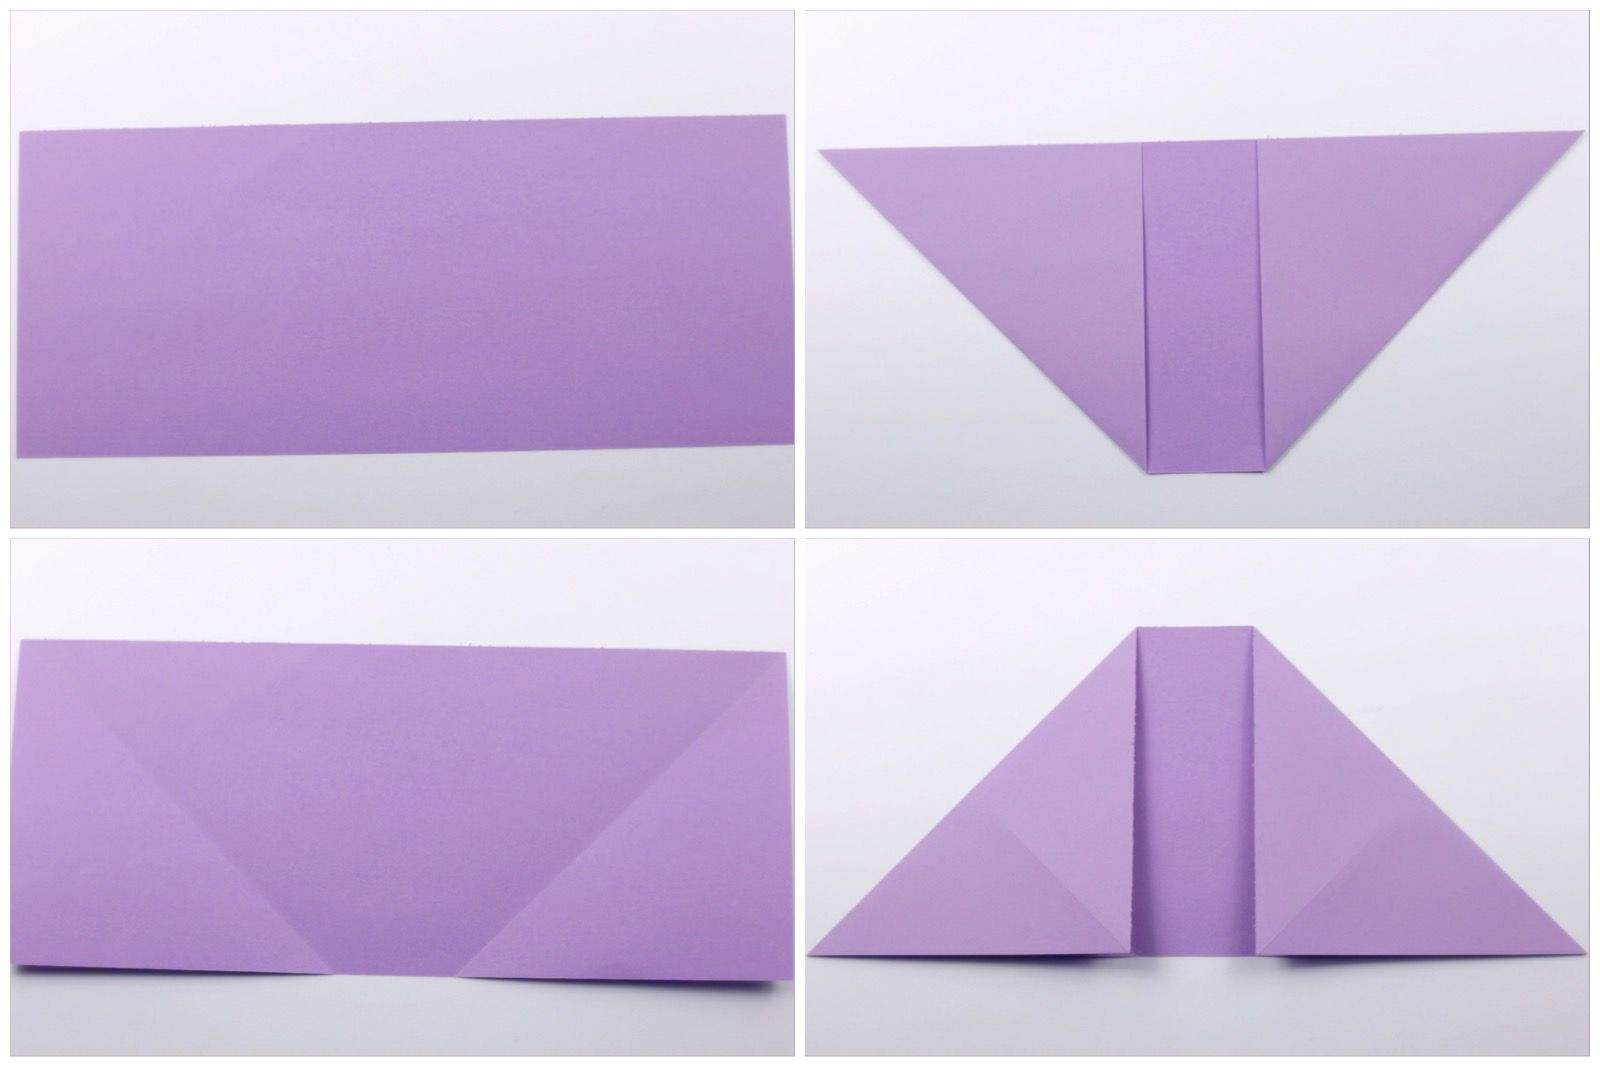 Heart Shaped Origami How To Make An Origami Heart